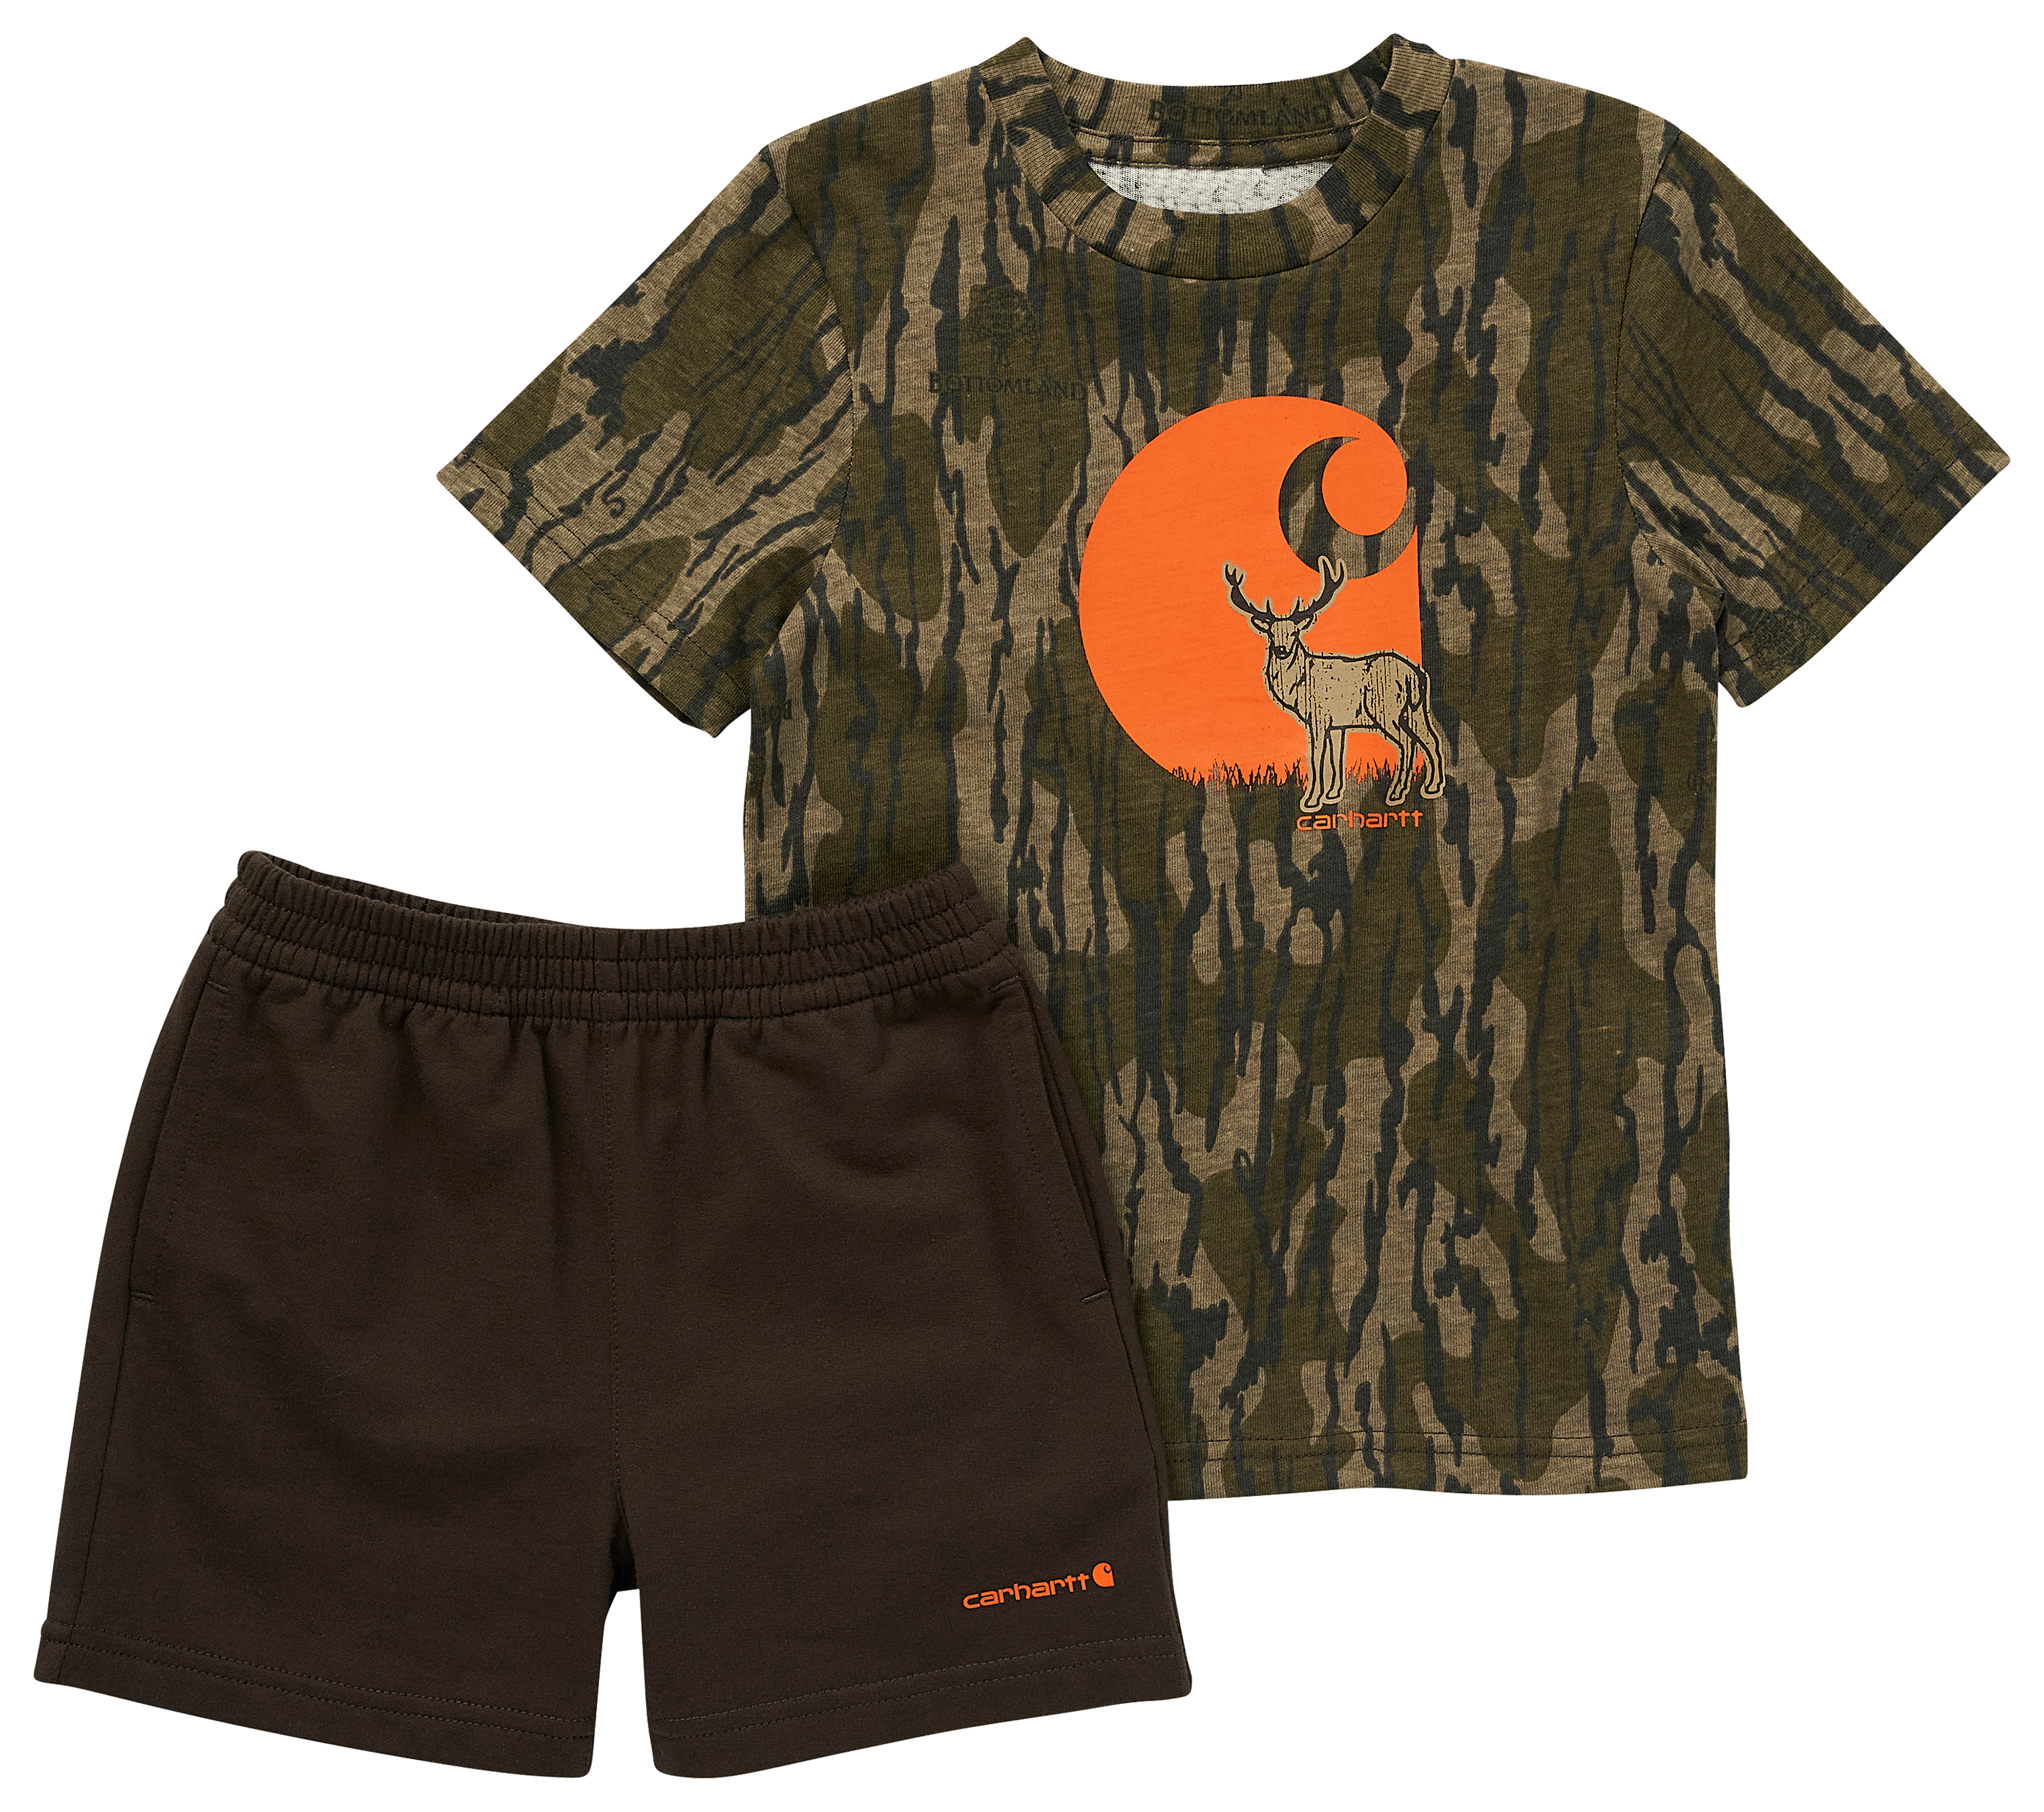 Carhartt Short-Sleeve T-Shirt and French Terry Shorts Set for Toddlers - Mossy Oak Original Bottomland - 3T